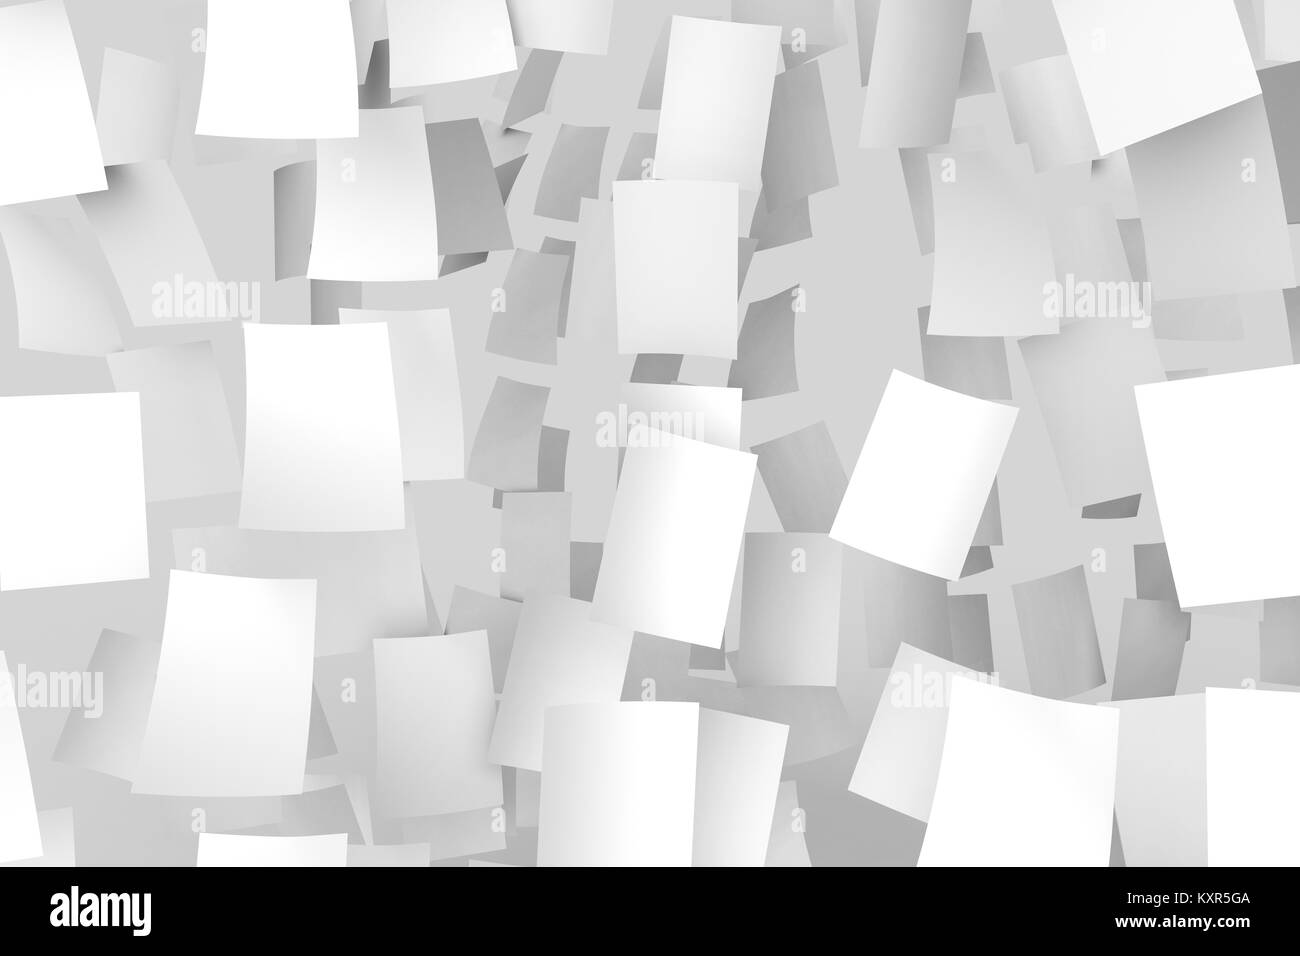 White papers falling from sky. Isolated on soft gray background. 3D illustrating. Stock Photo